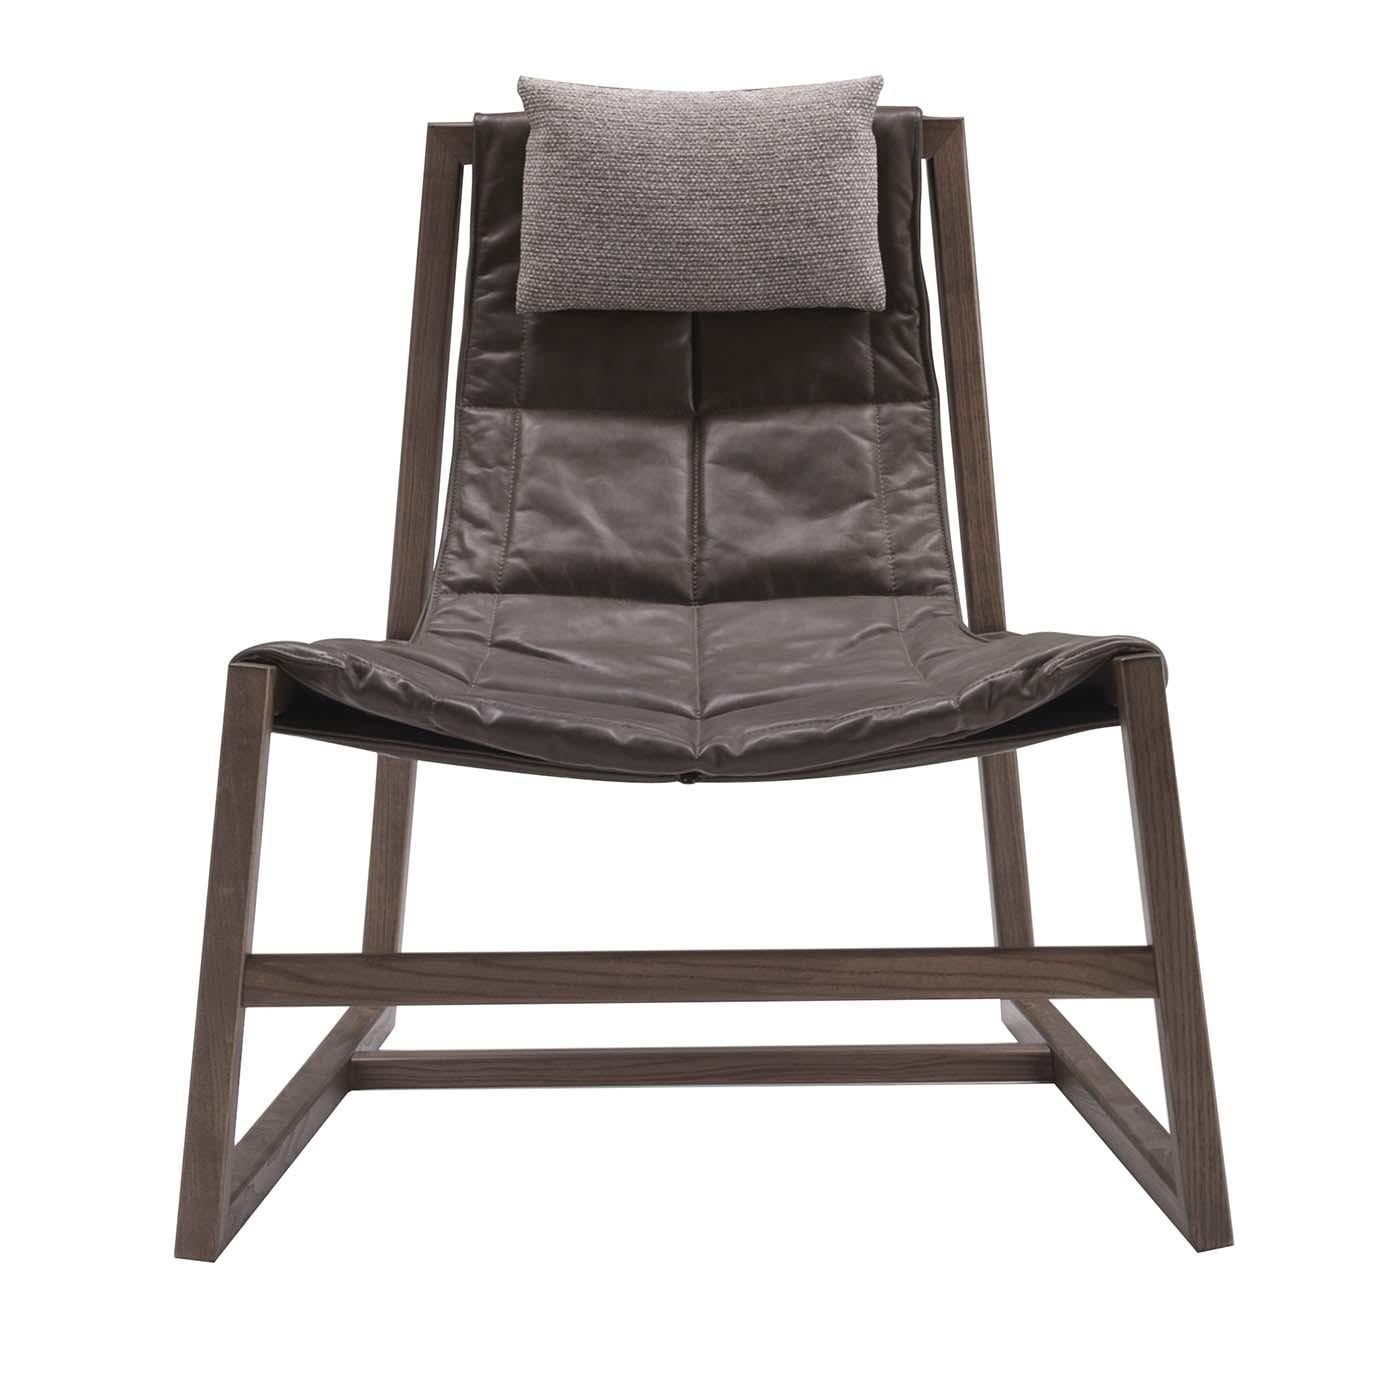 Italian Relax Brown Lounge Chair by Controdesign Studio by Pacini & Cappellini For Sale